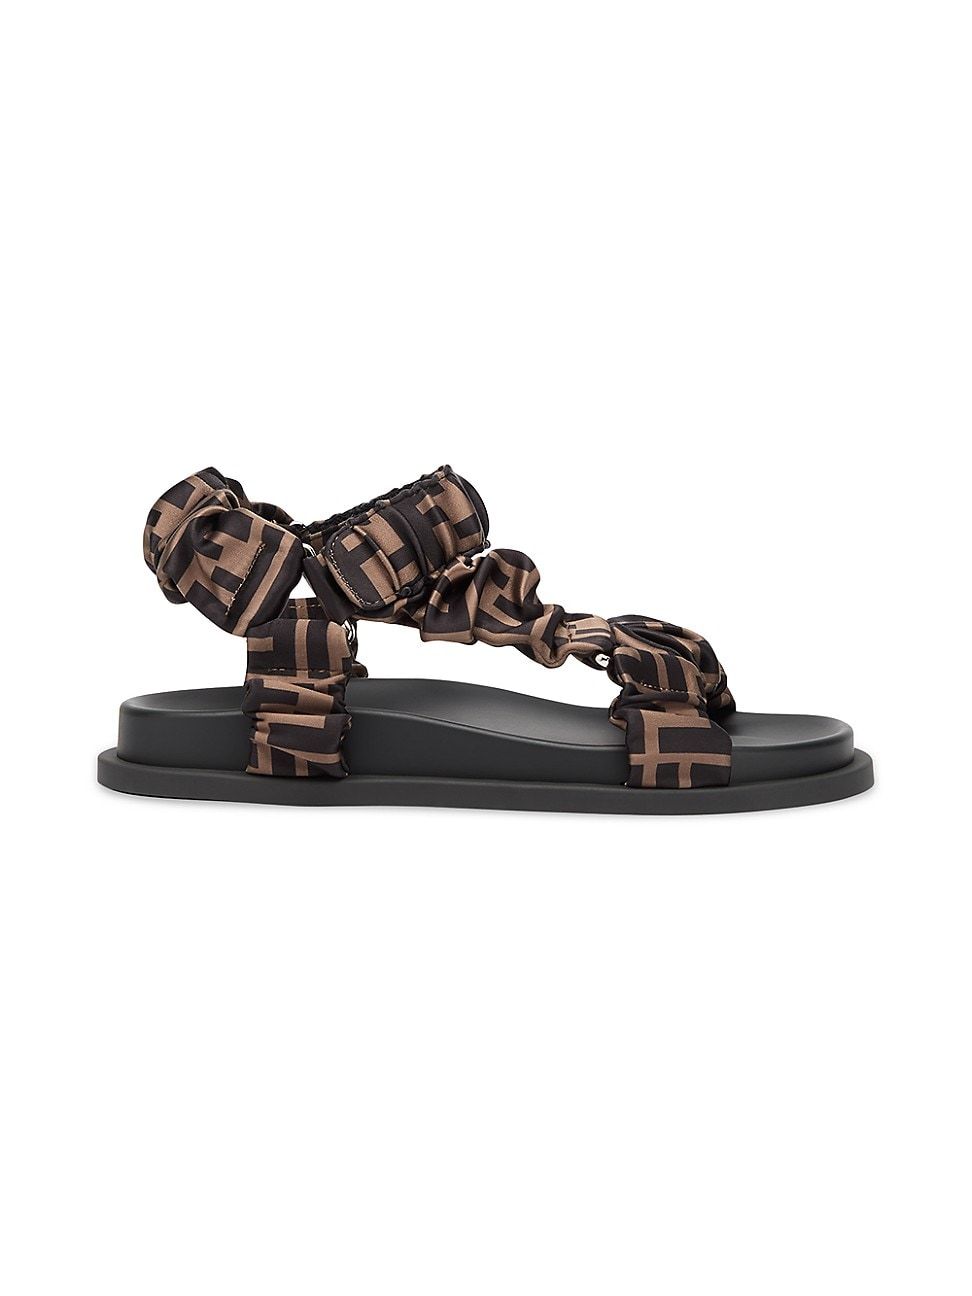 Women's FF Monogram Satin Ruched Sandals - Tabacco Nero - Size 7 | Saks Fifth Avenue